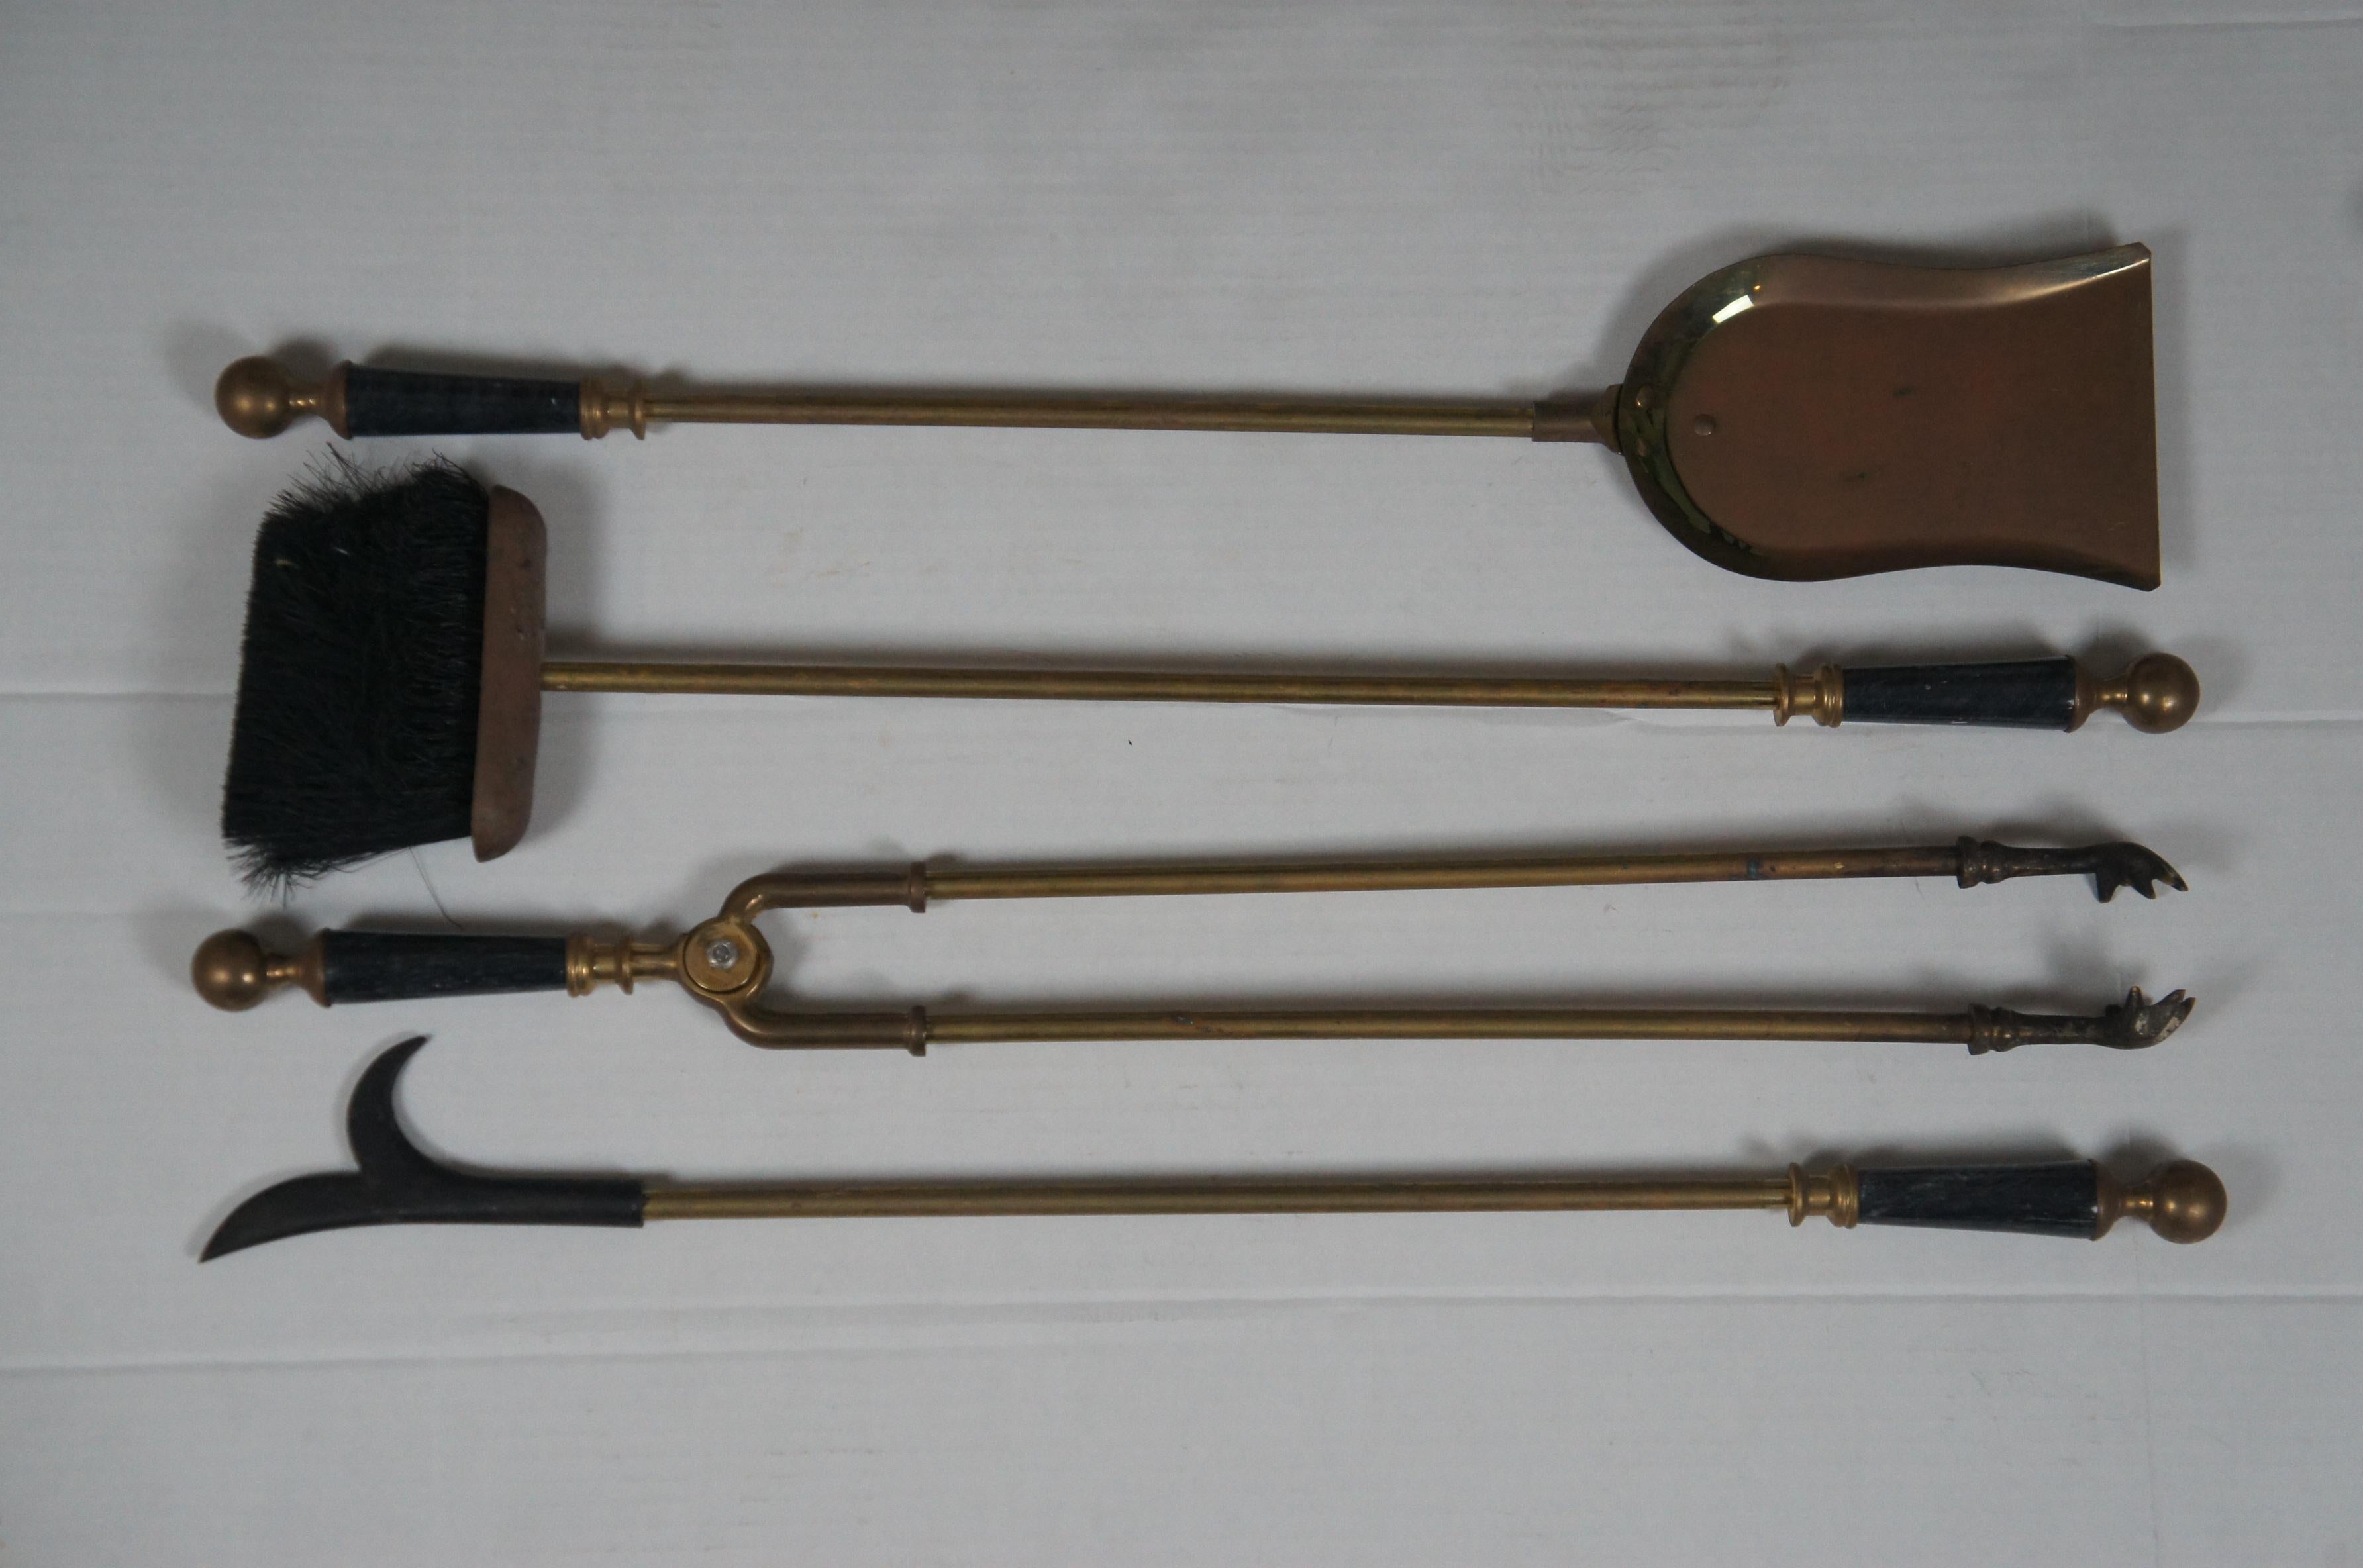 Vintage Decorative Crafts 5 Pc Brass Marble Hearth Fireplace Tools 2921 31